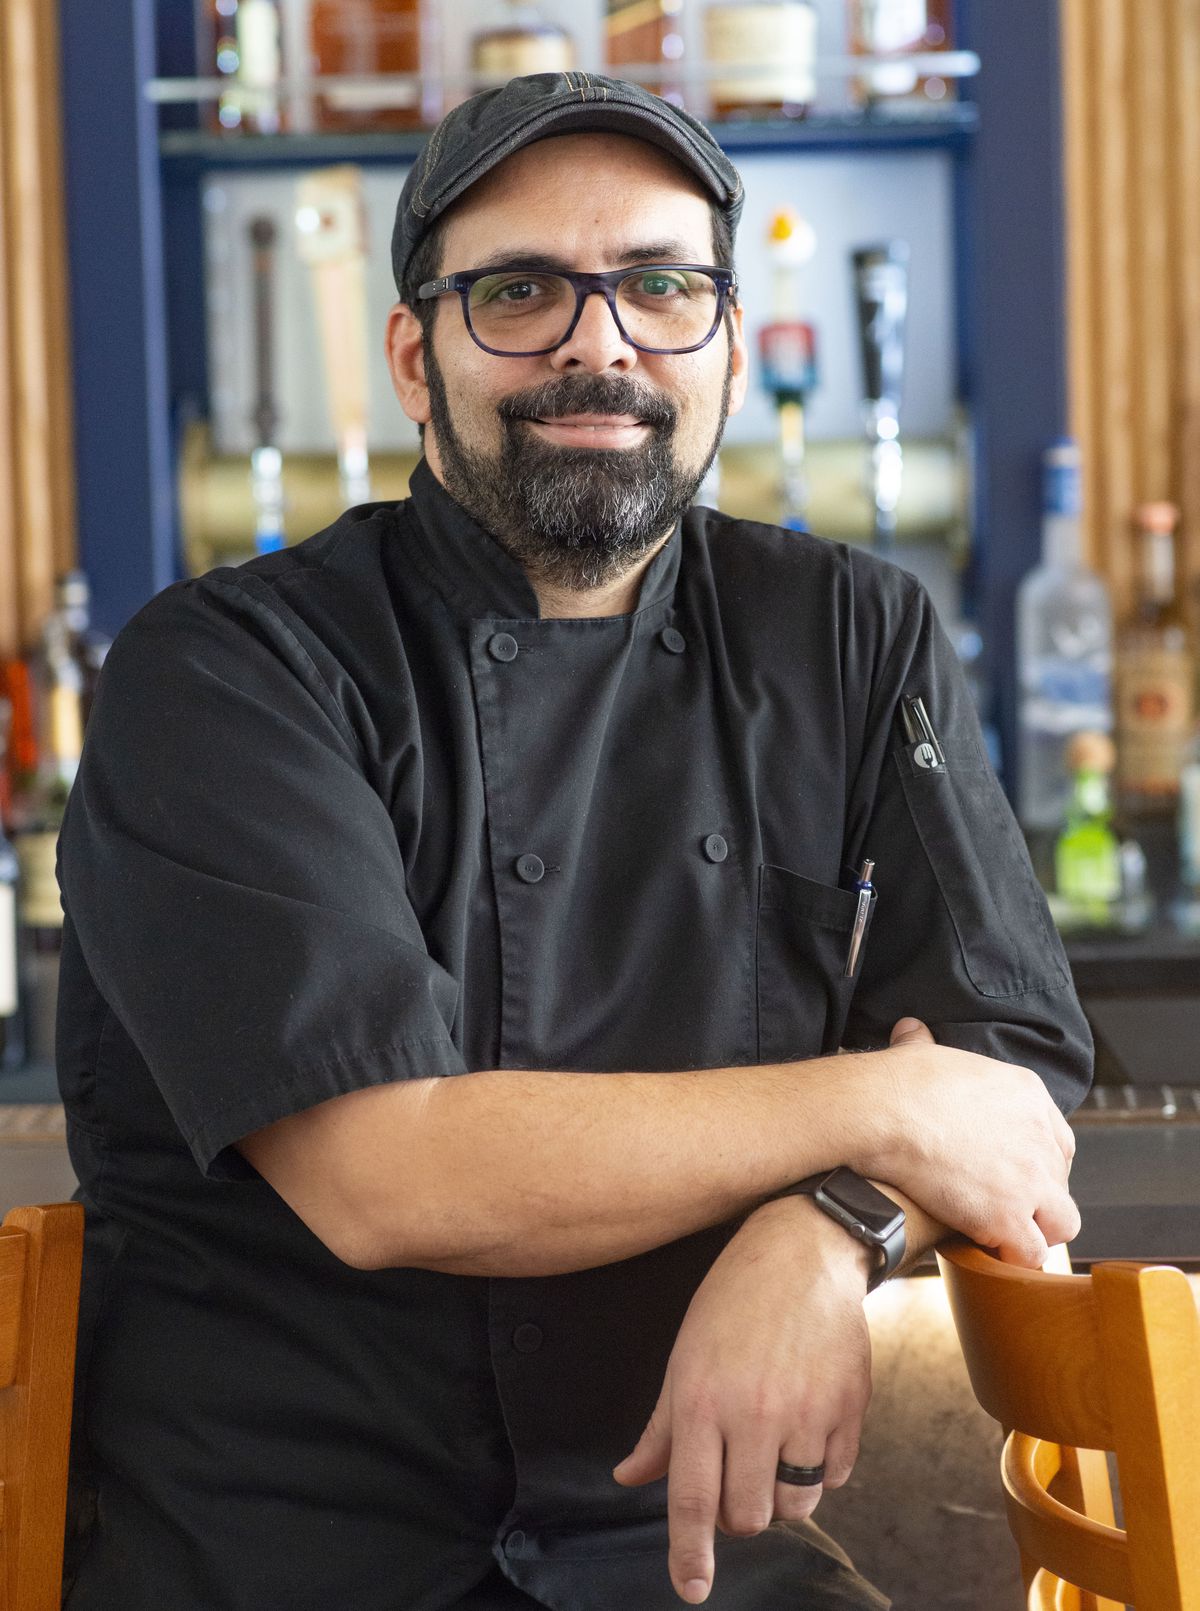 Mission Group corporate chef Roberto Hernandez